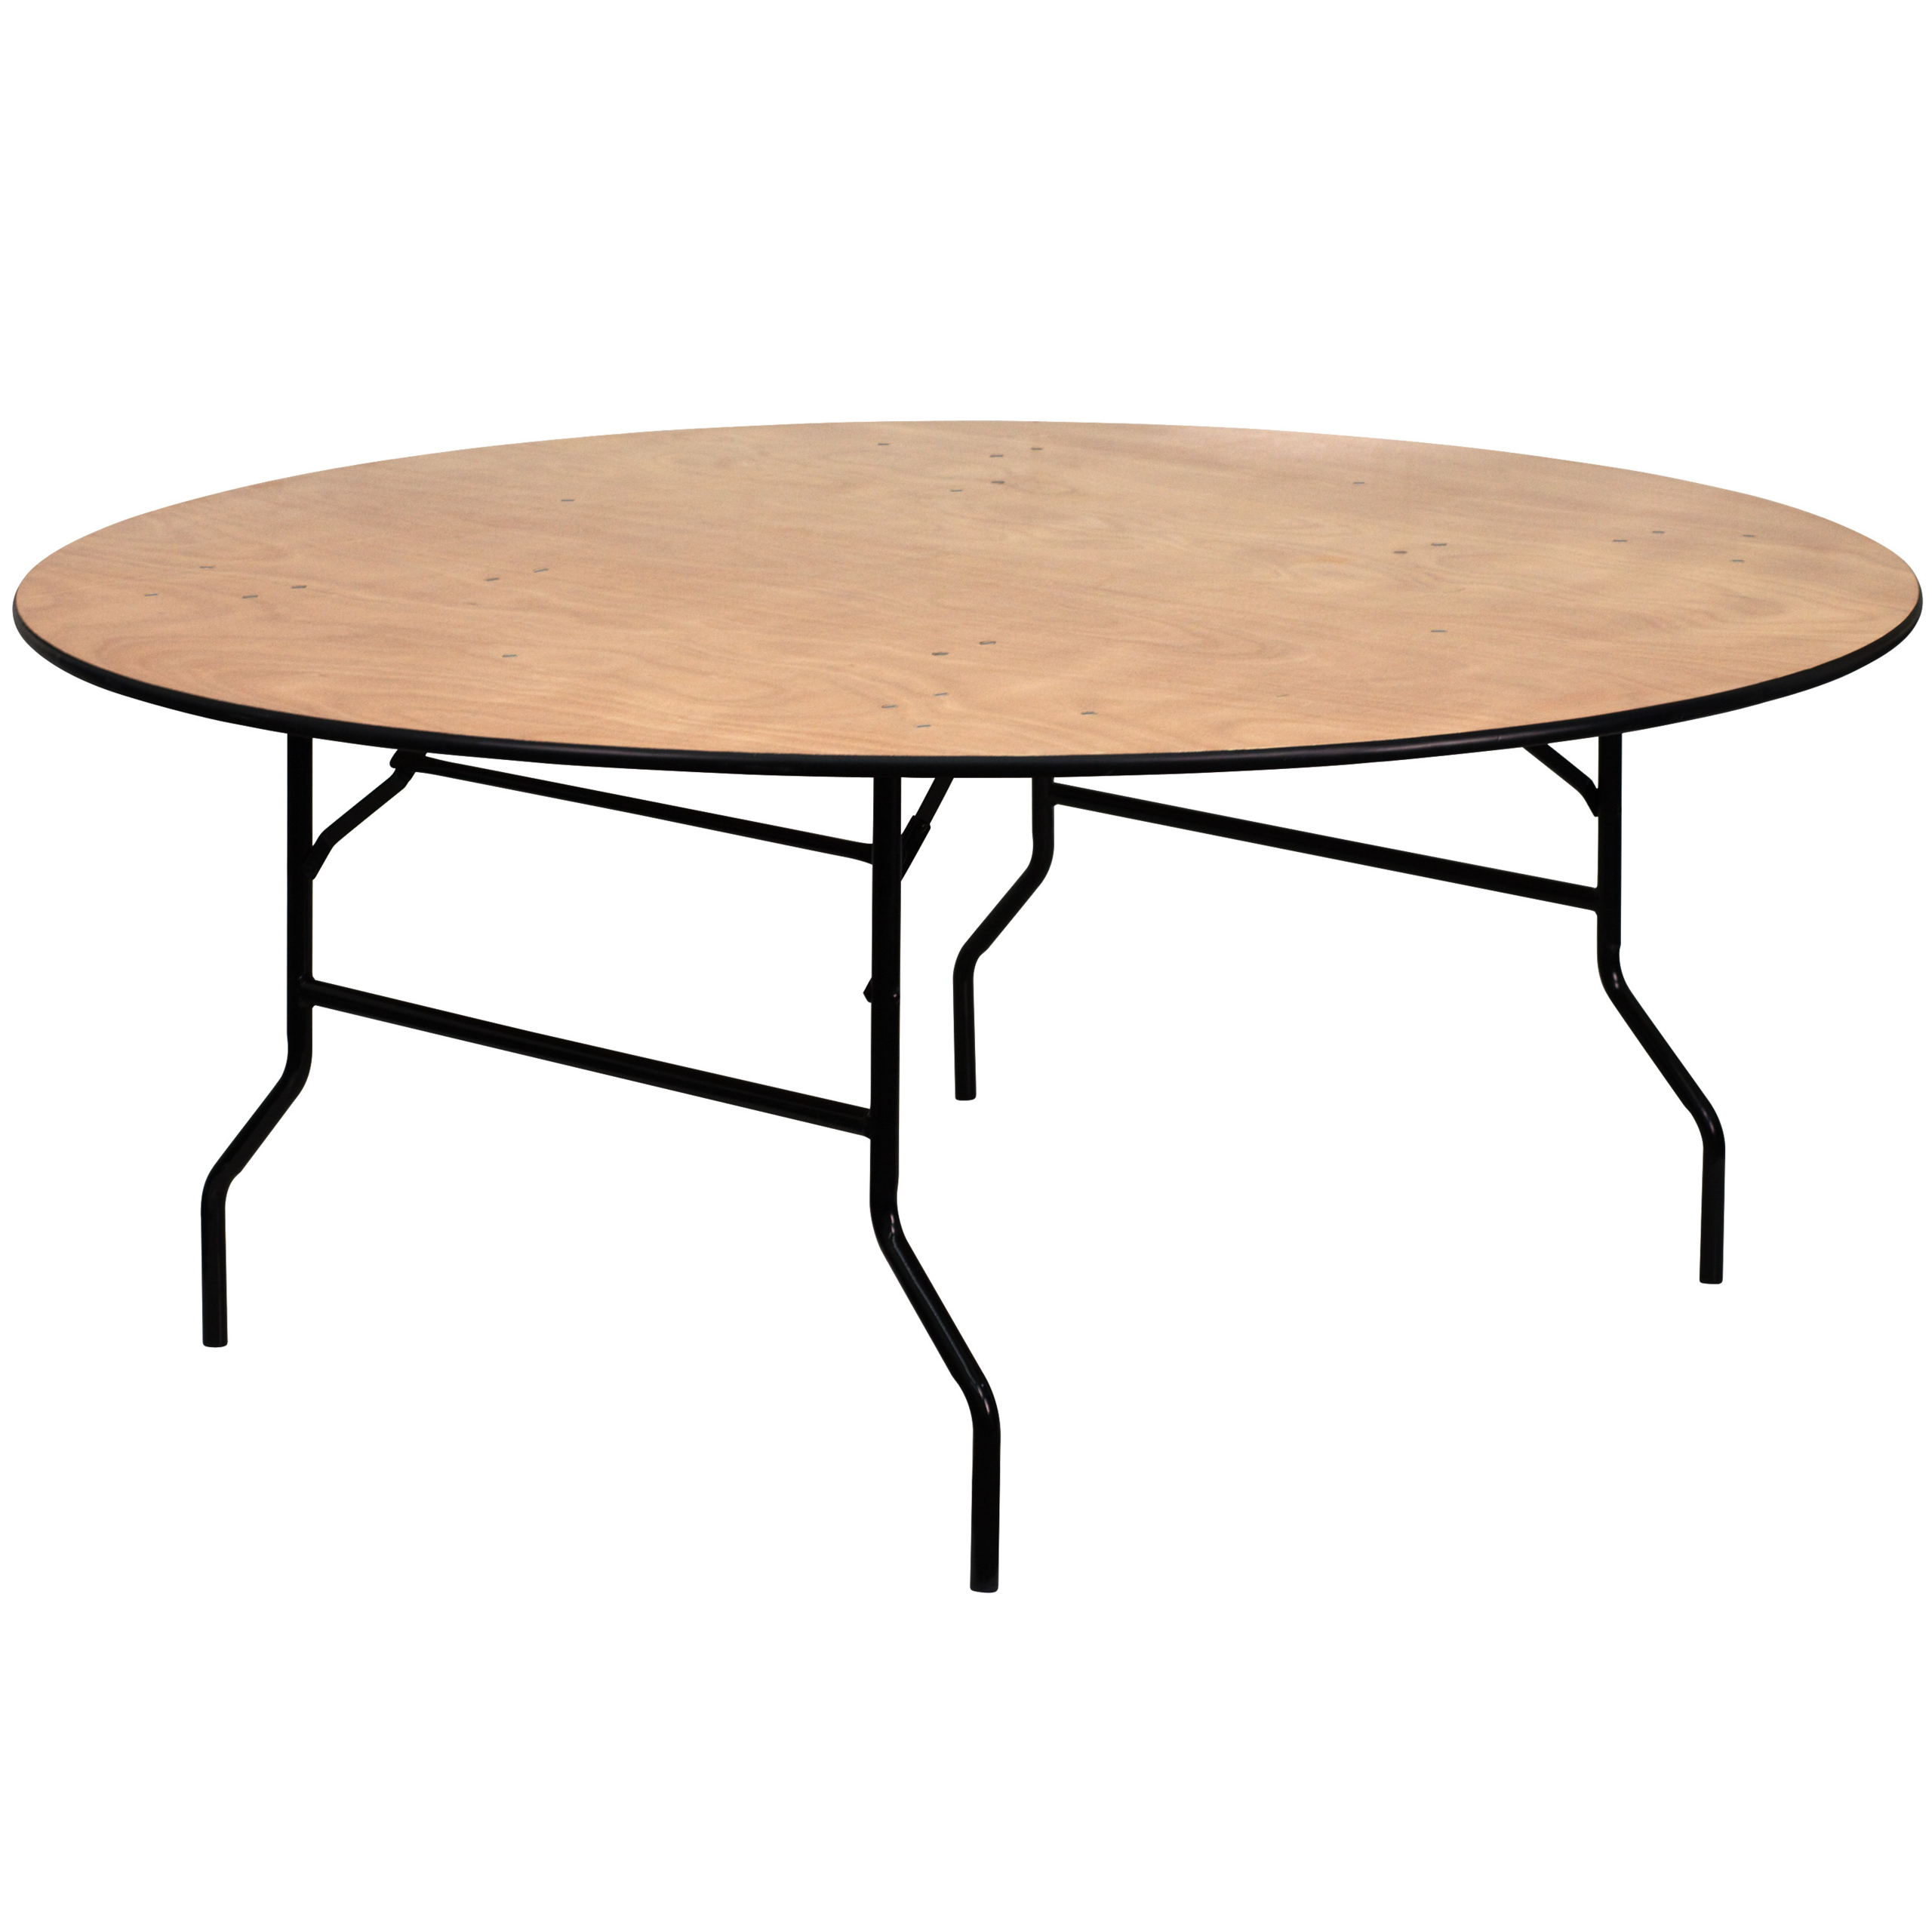 Flash Furniture YT-WRFT72-TBL-GG 72-Inch Round Wood Folding Banquet Table with Clear Coated Finished Top, Black